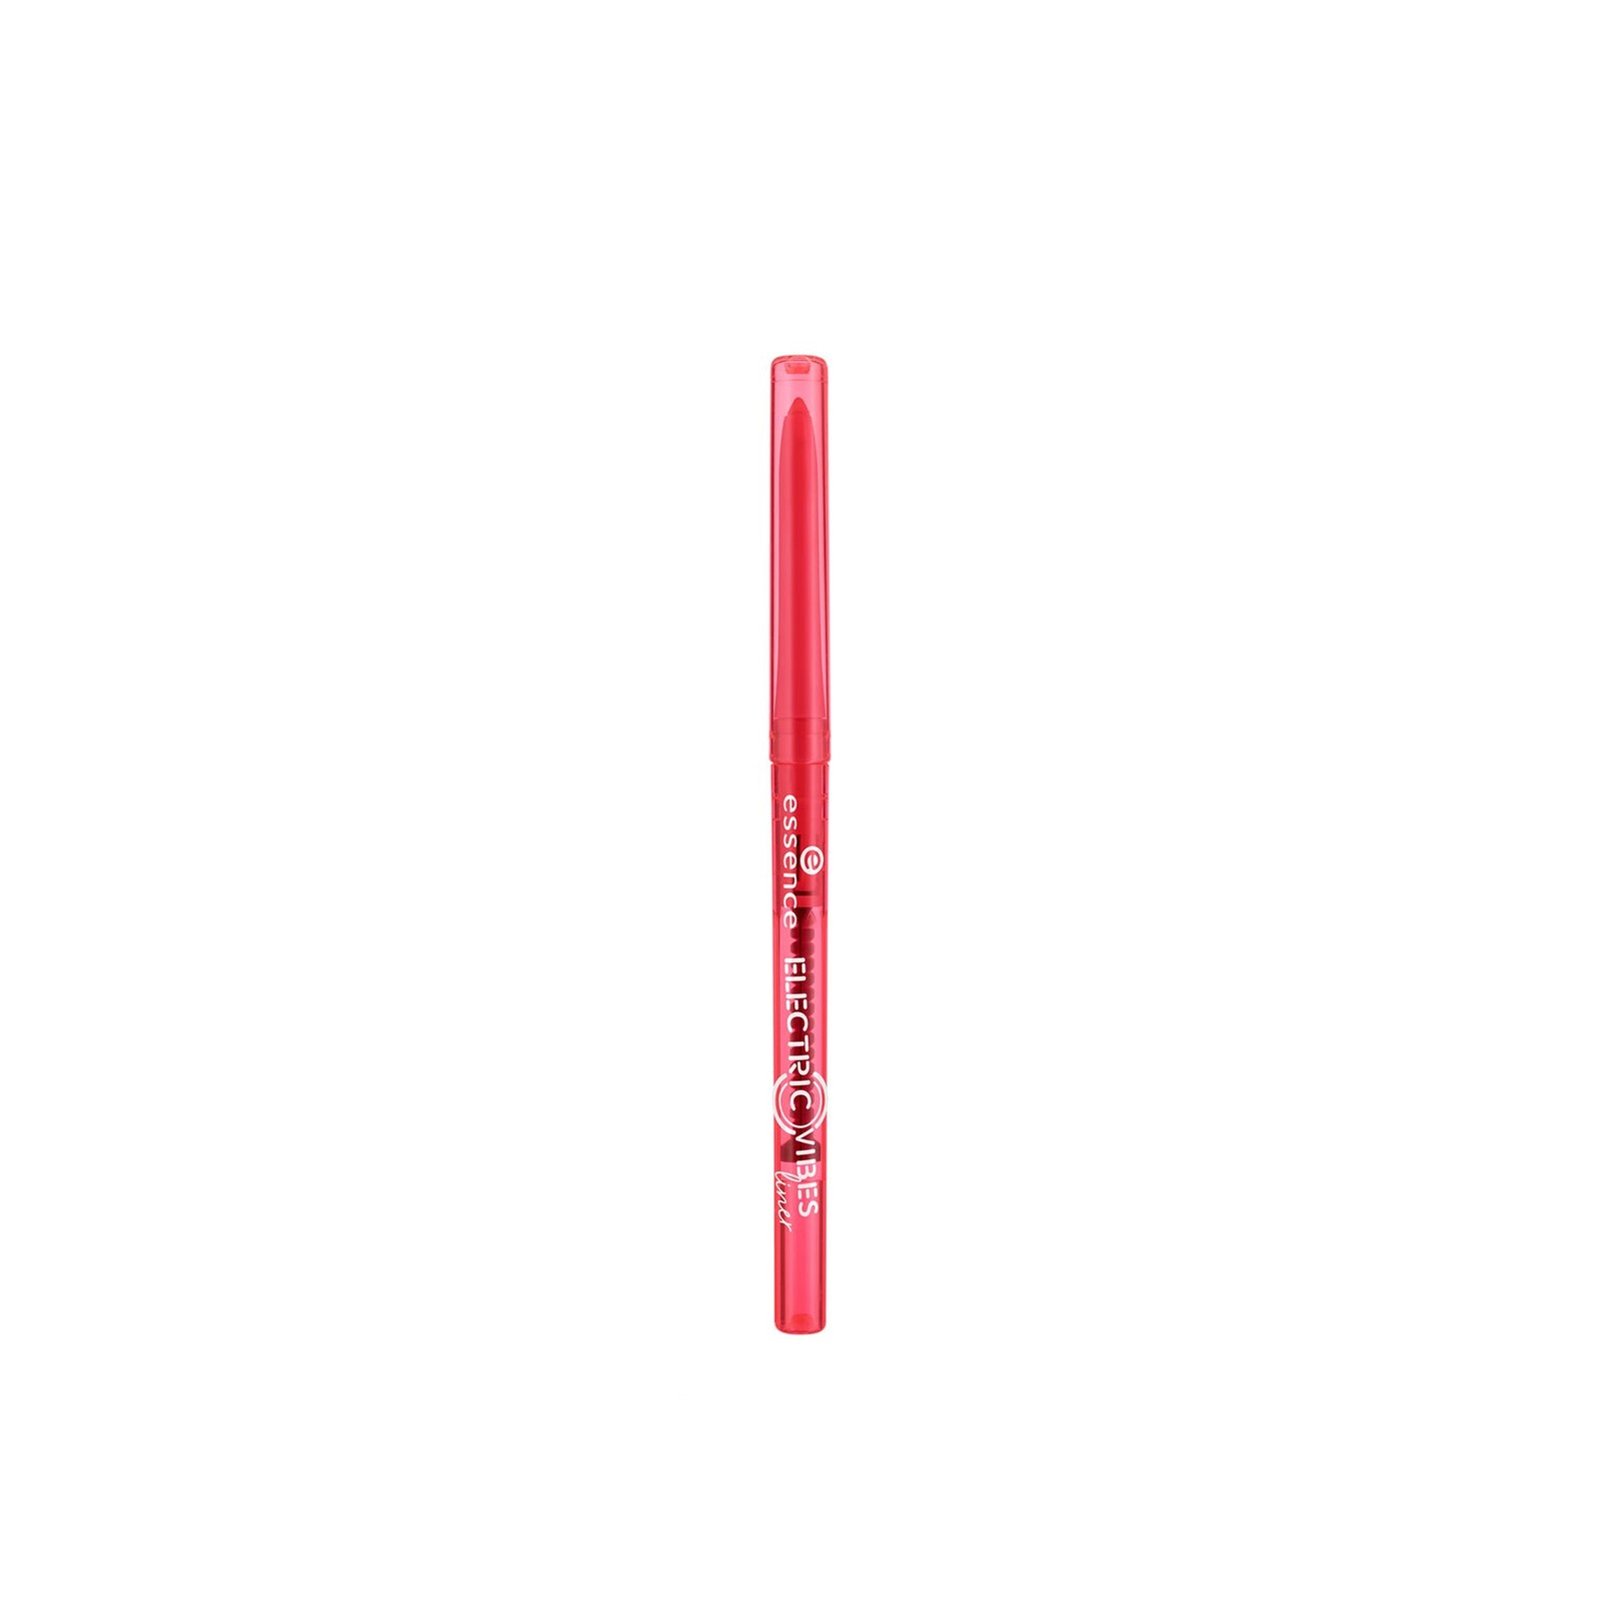 essence Electric Vibes Liner 01 staywild 0.28g (0.009 oz)